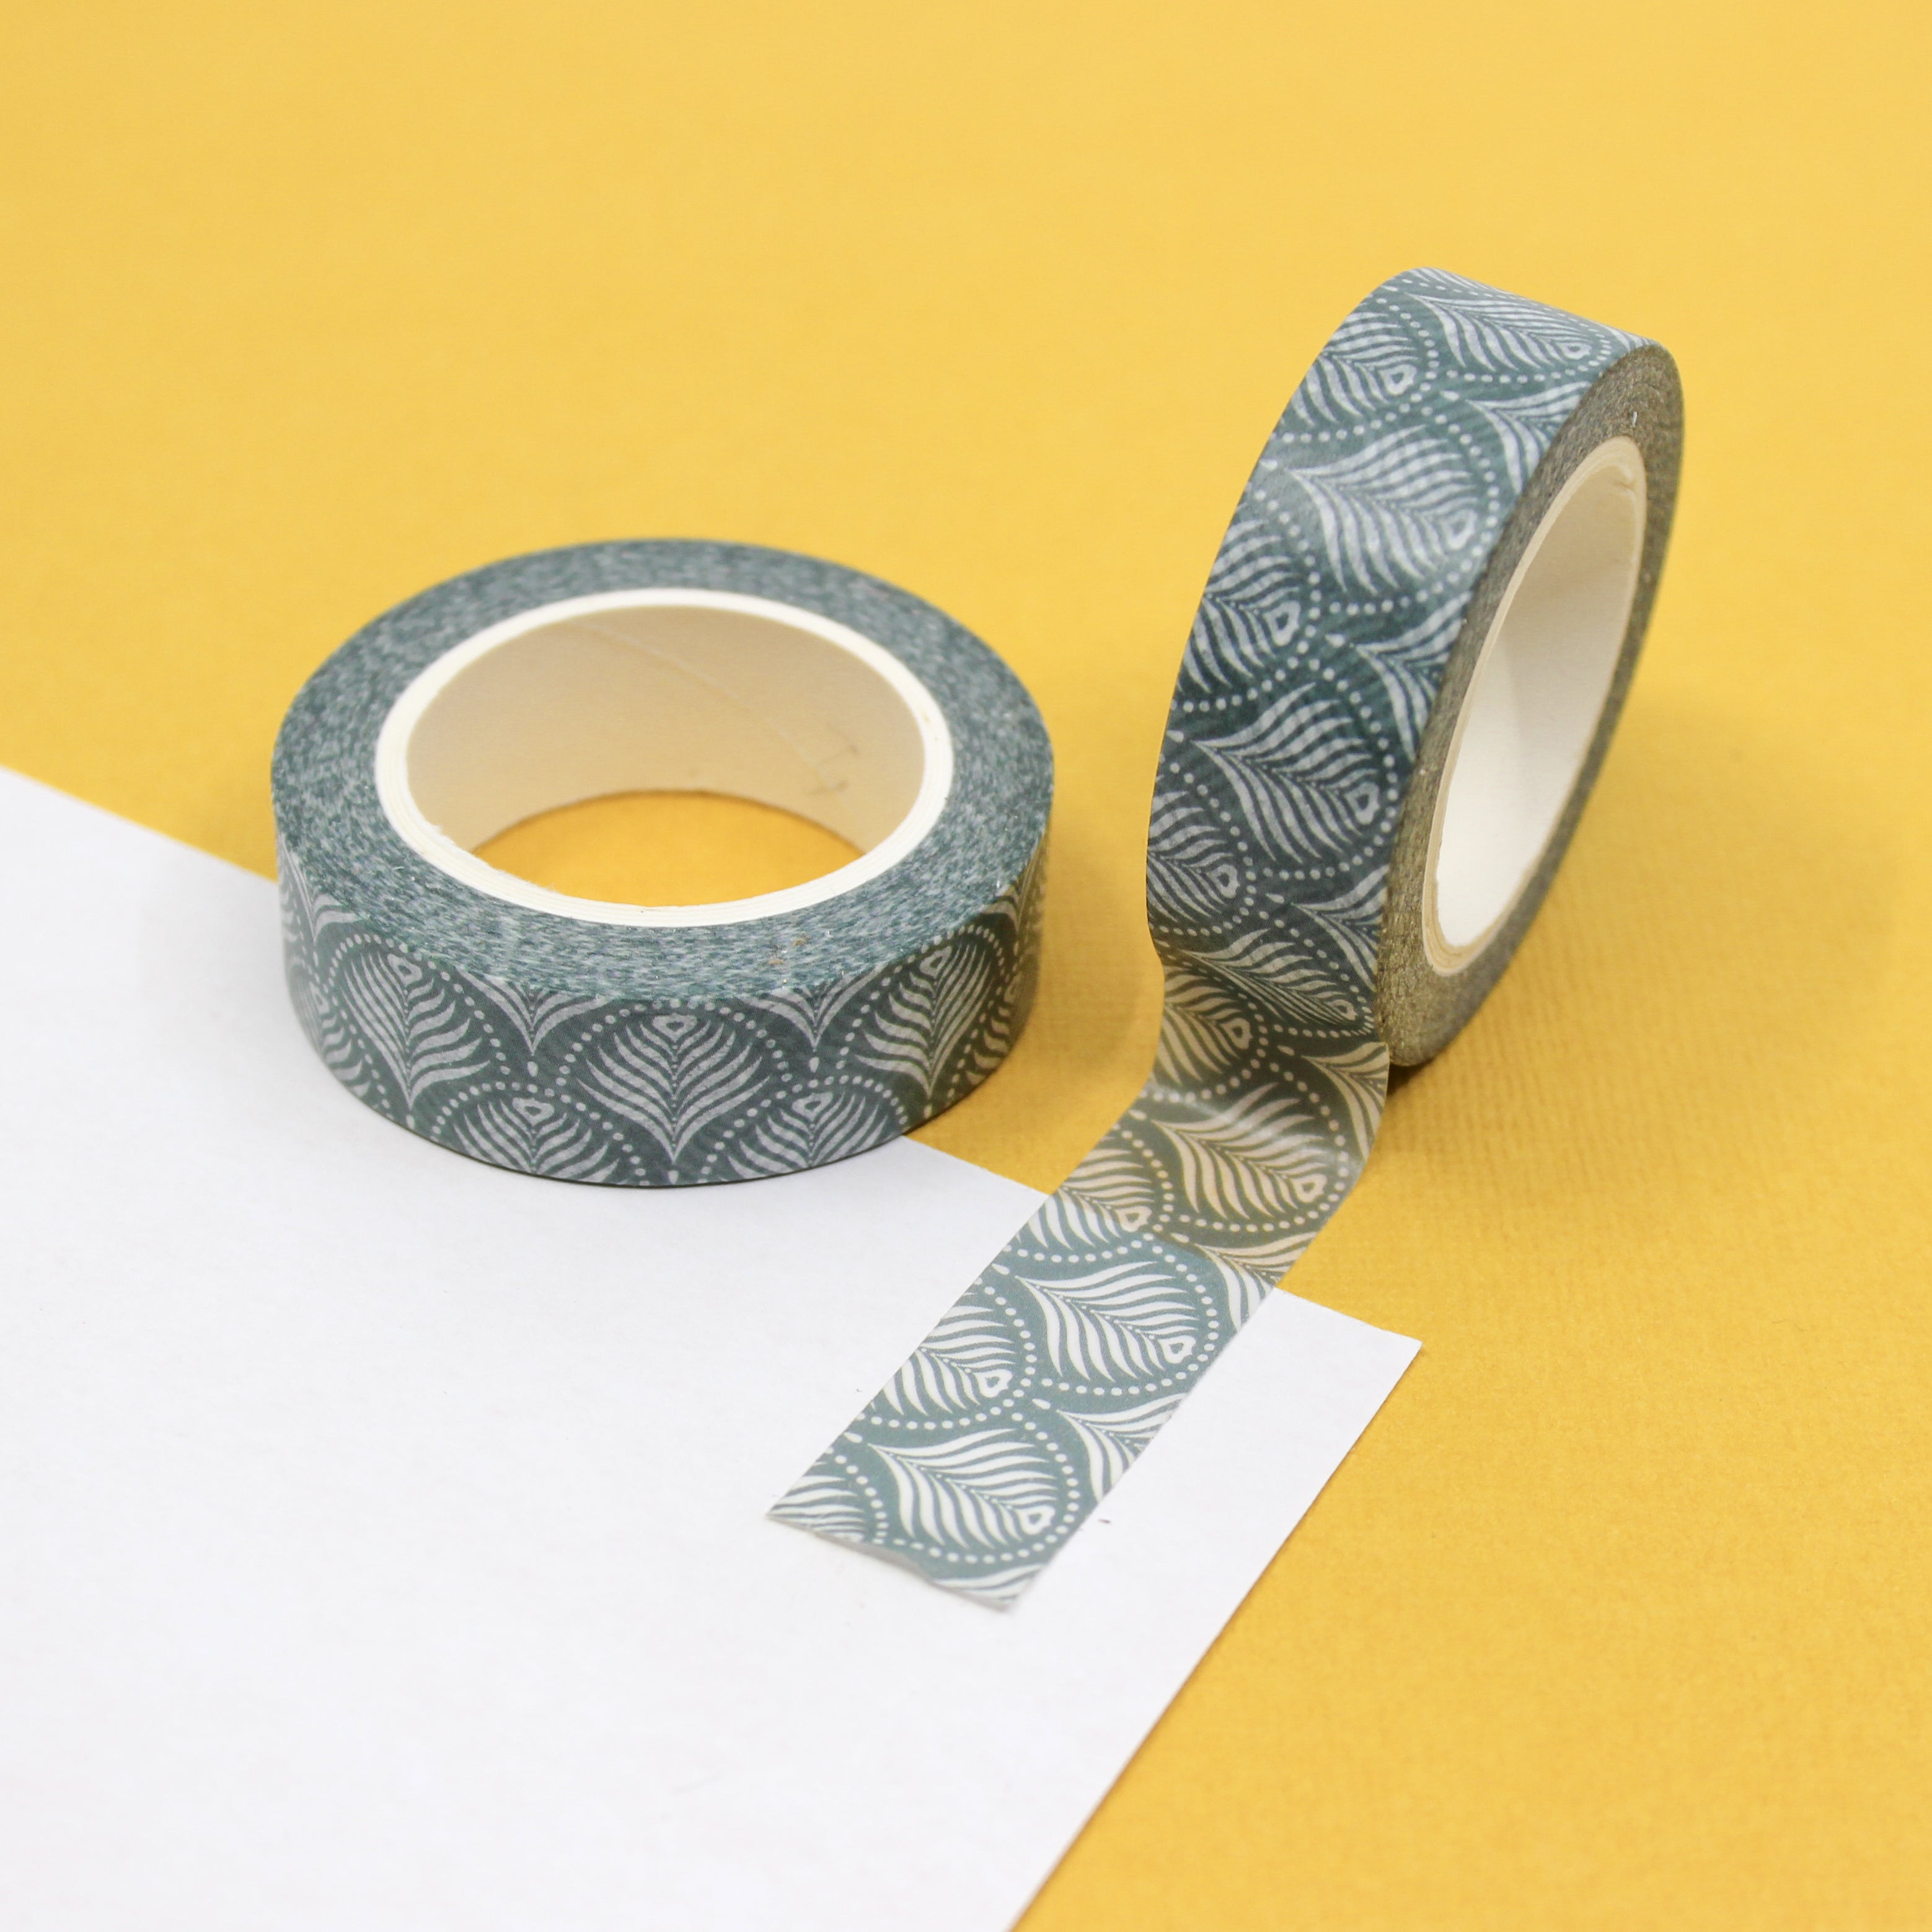  Easter Green Palm Pattern Washi Tape: Add a tropical touch to your Easter crafts with our Green Palm Pattern Washi Tape. This tape features a fun and festive palm leaf design in shades of green, perfect for adding a pop of color to your projects. Whether you're decorating Easter cards, creating scrapbook layouts, or embellishing gift wrap, this tape is sure to add a touch of springtime cheer. This tape is sold at BBB Supplies Craft Shop.